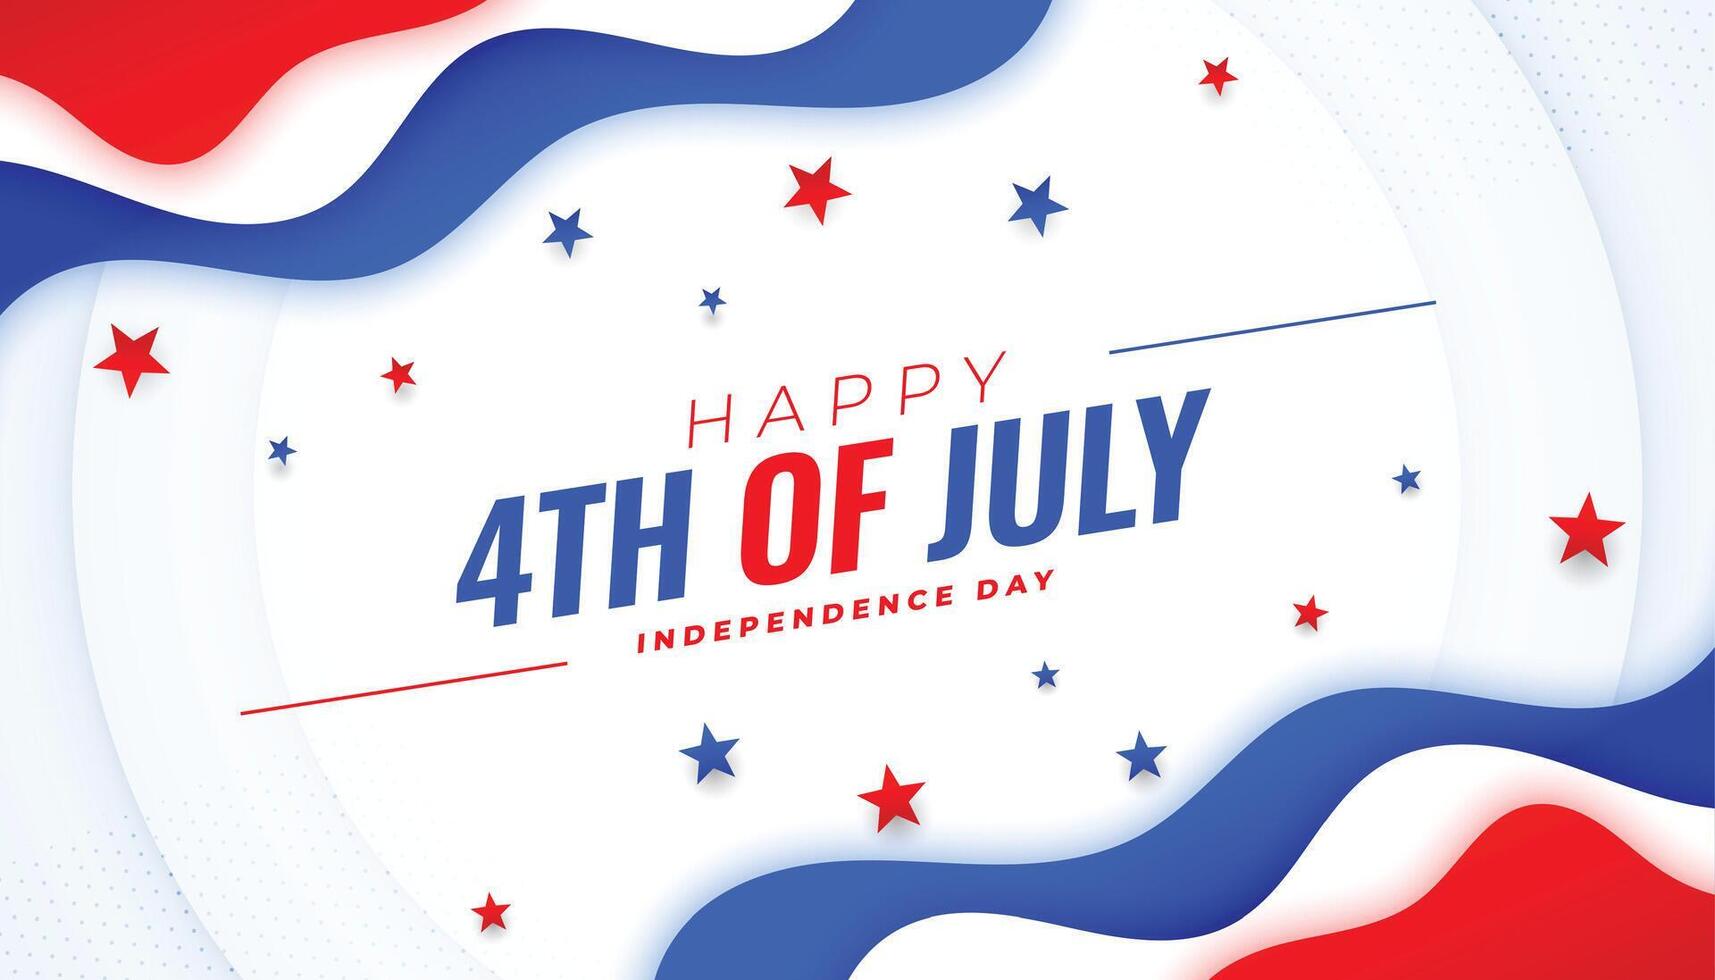 happy 4th of july independence day in wave style vector